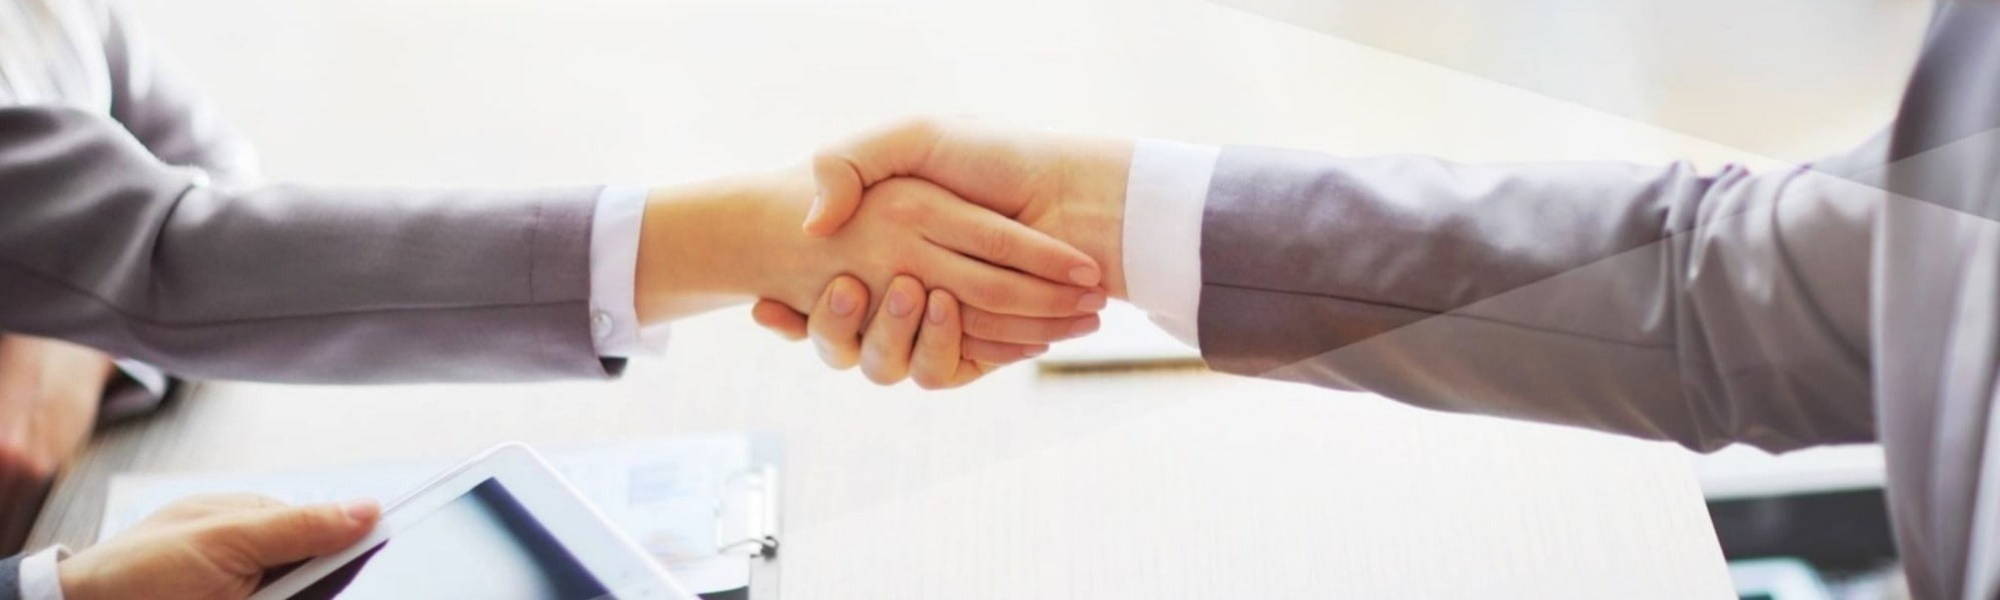 two people shaking hands business meeting interview